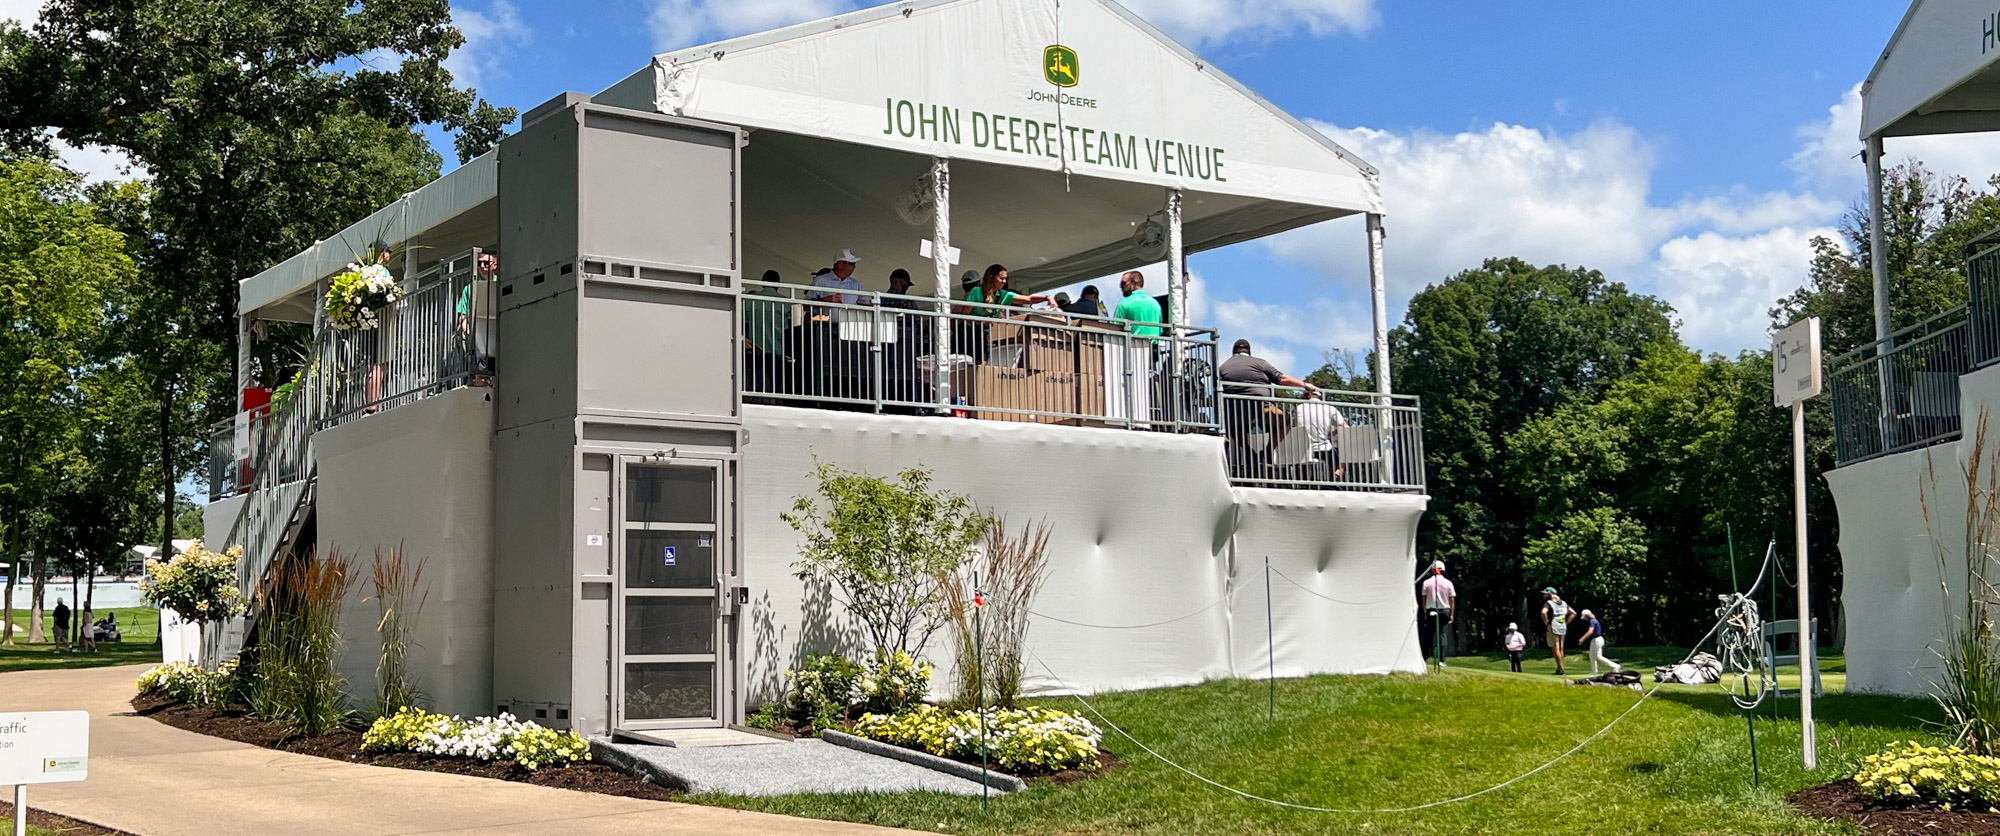 12' ADA wheelchair lift accessing the John Deere Team Venue hospitality structure to bypass the stairs located behind it.